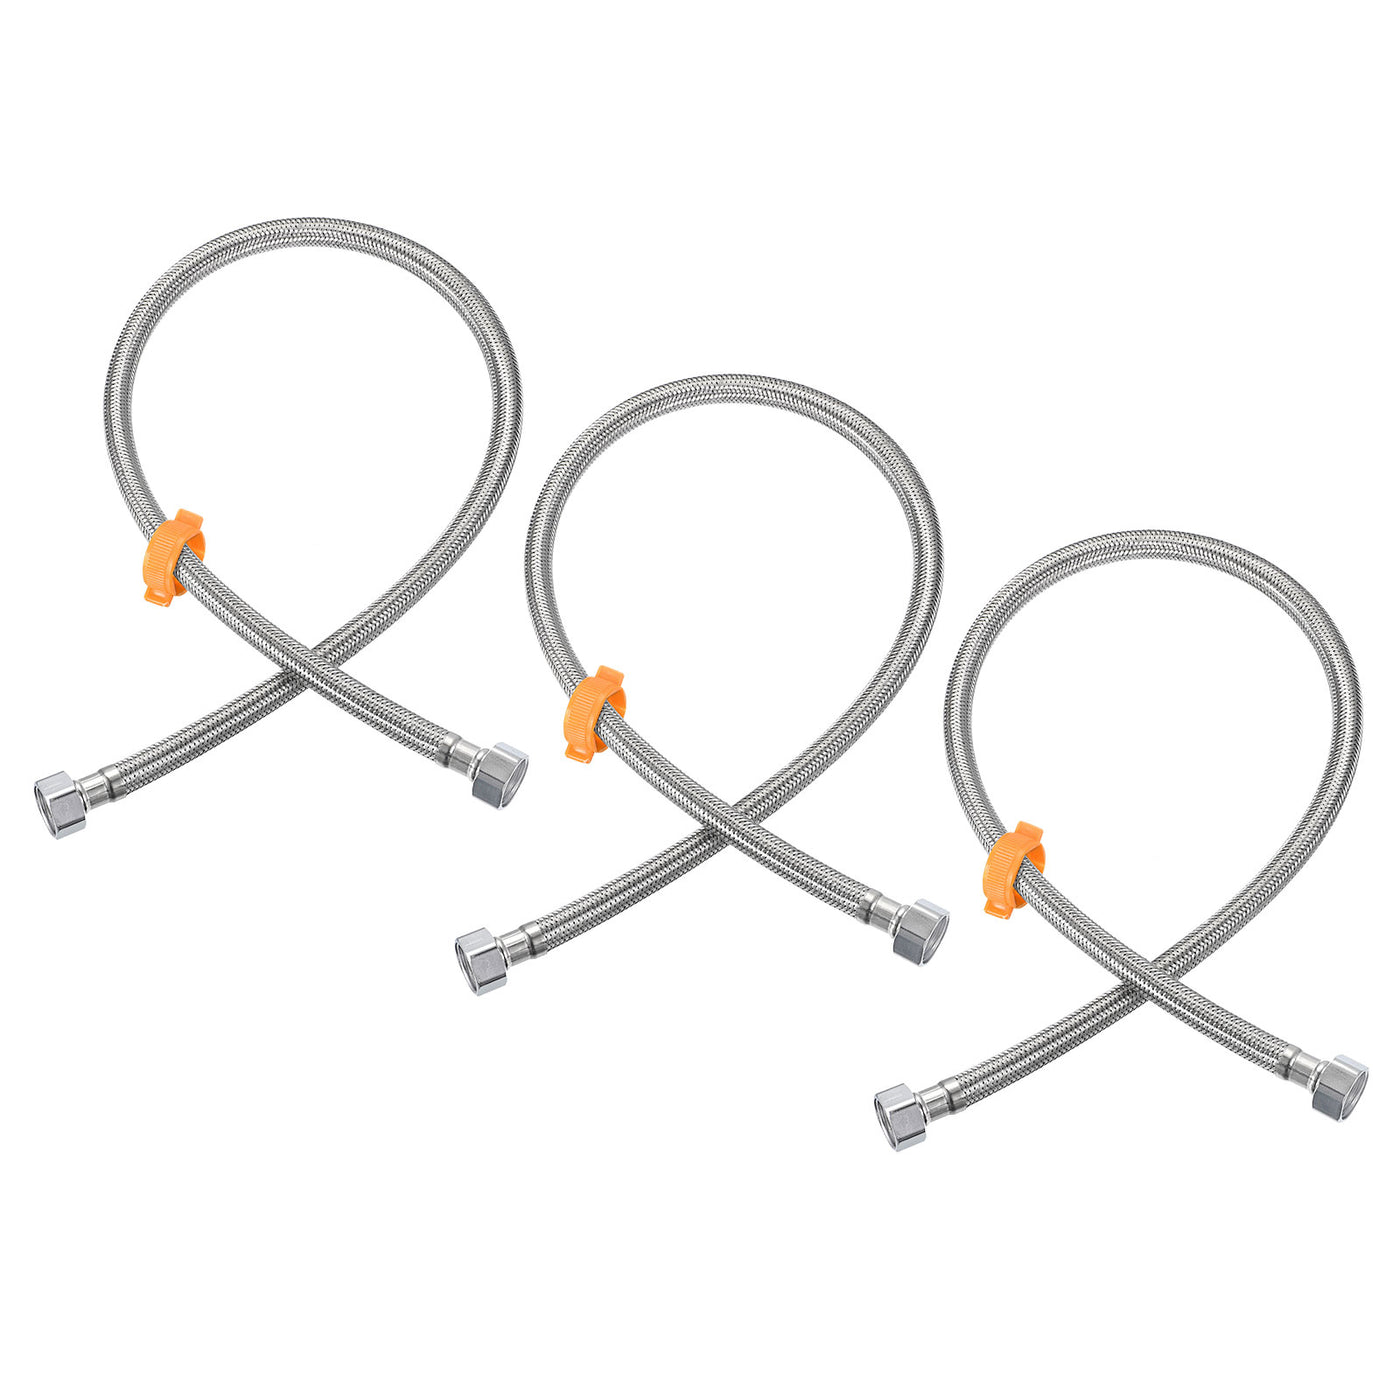 uxcell Uxcell Faucet Supply Line Connector, 3pcs G1/2 Female x G1/2 Female 31", Silver Tone